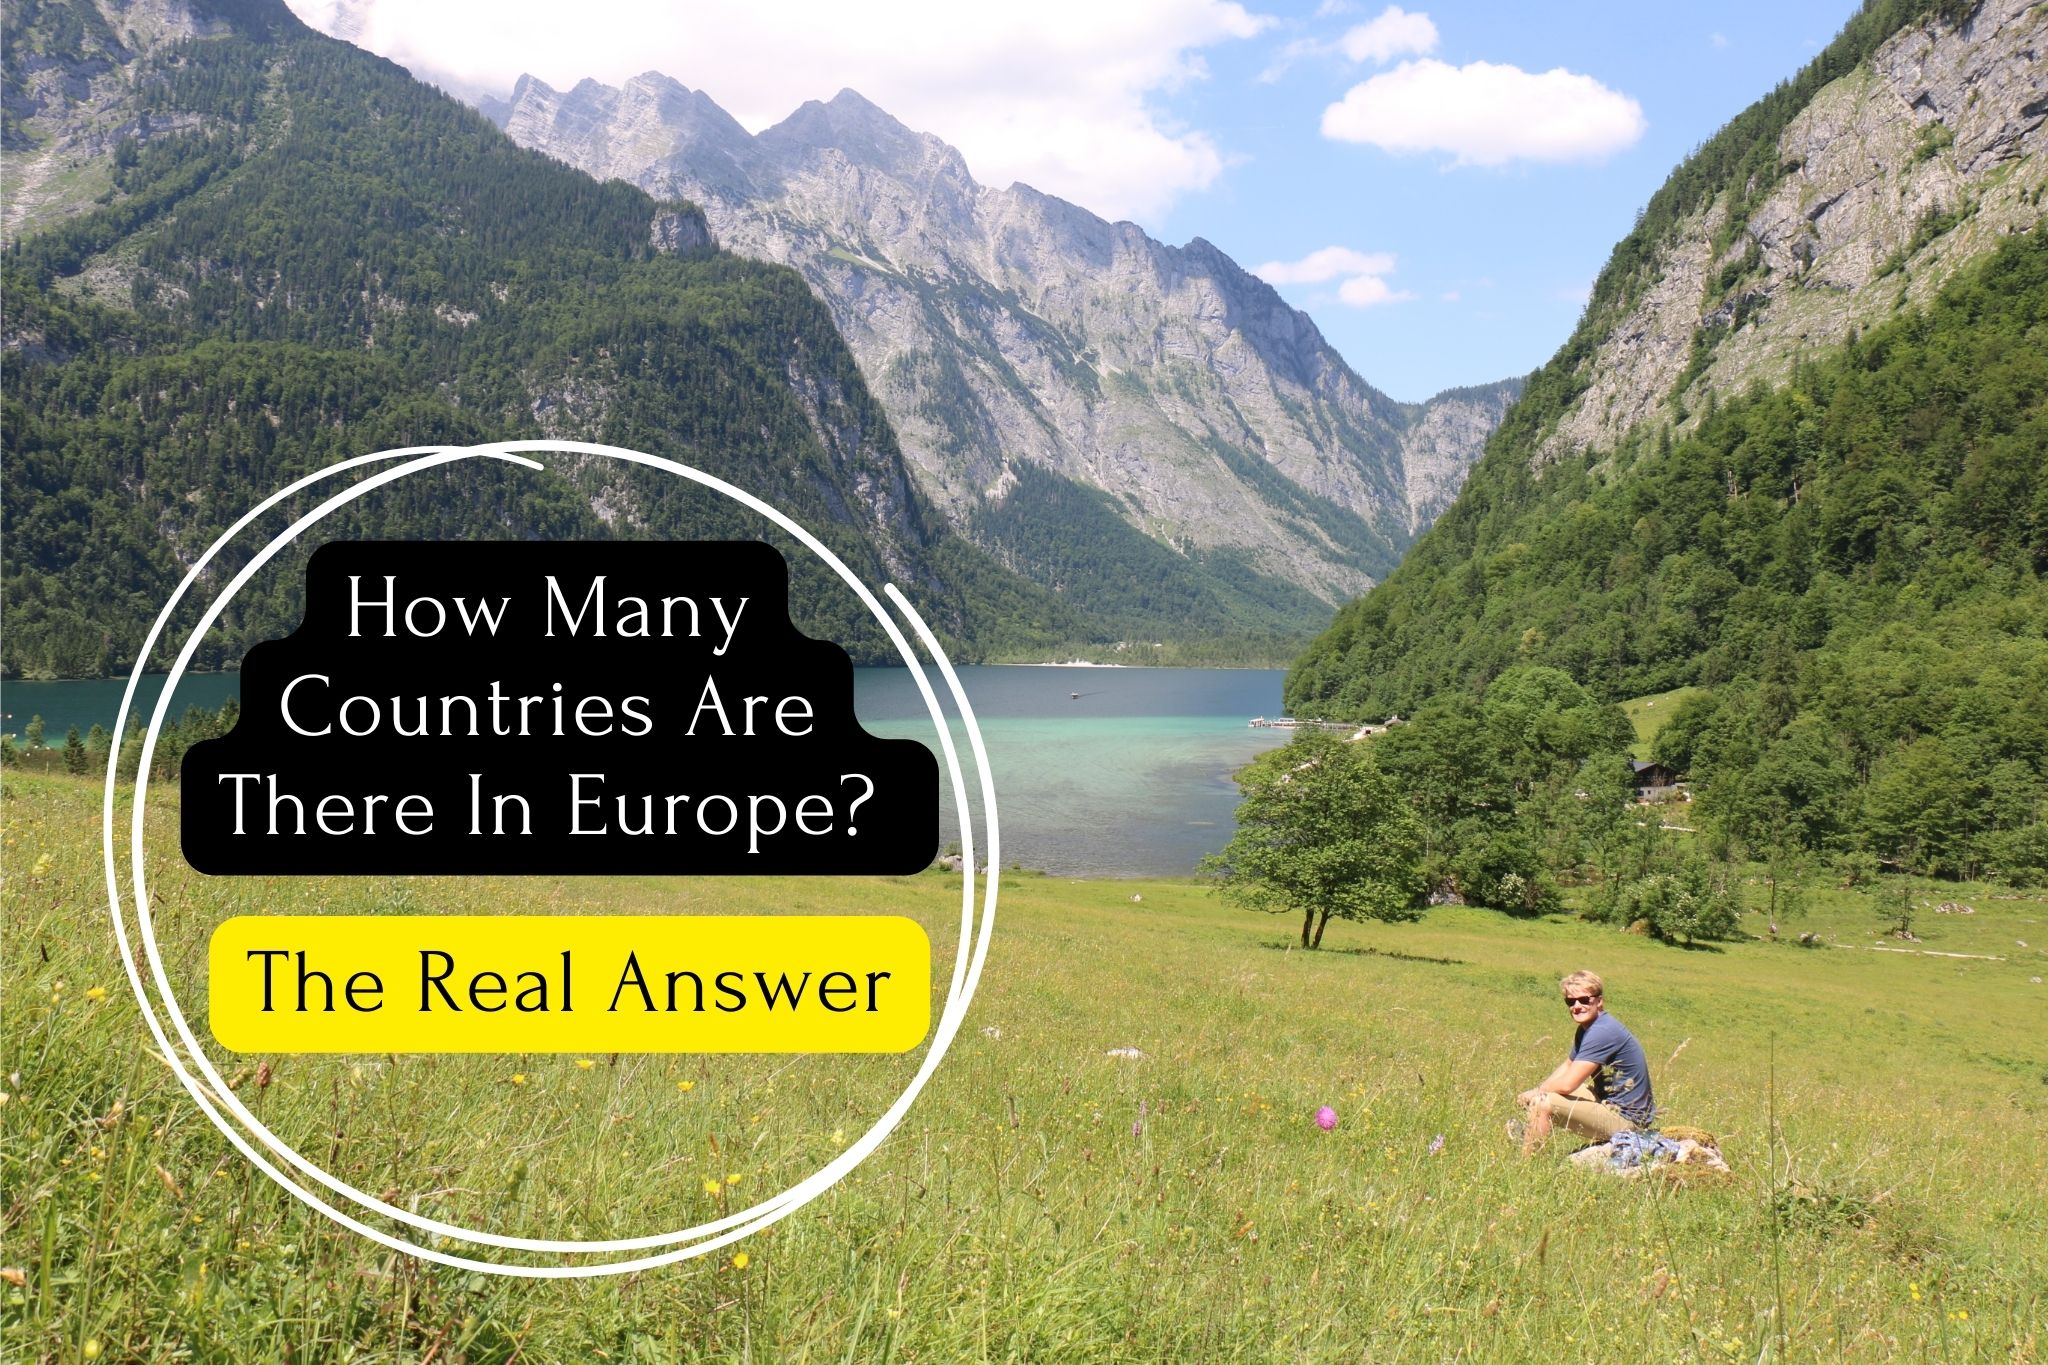 How Many Countries Are There In Europe?